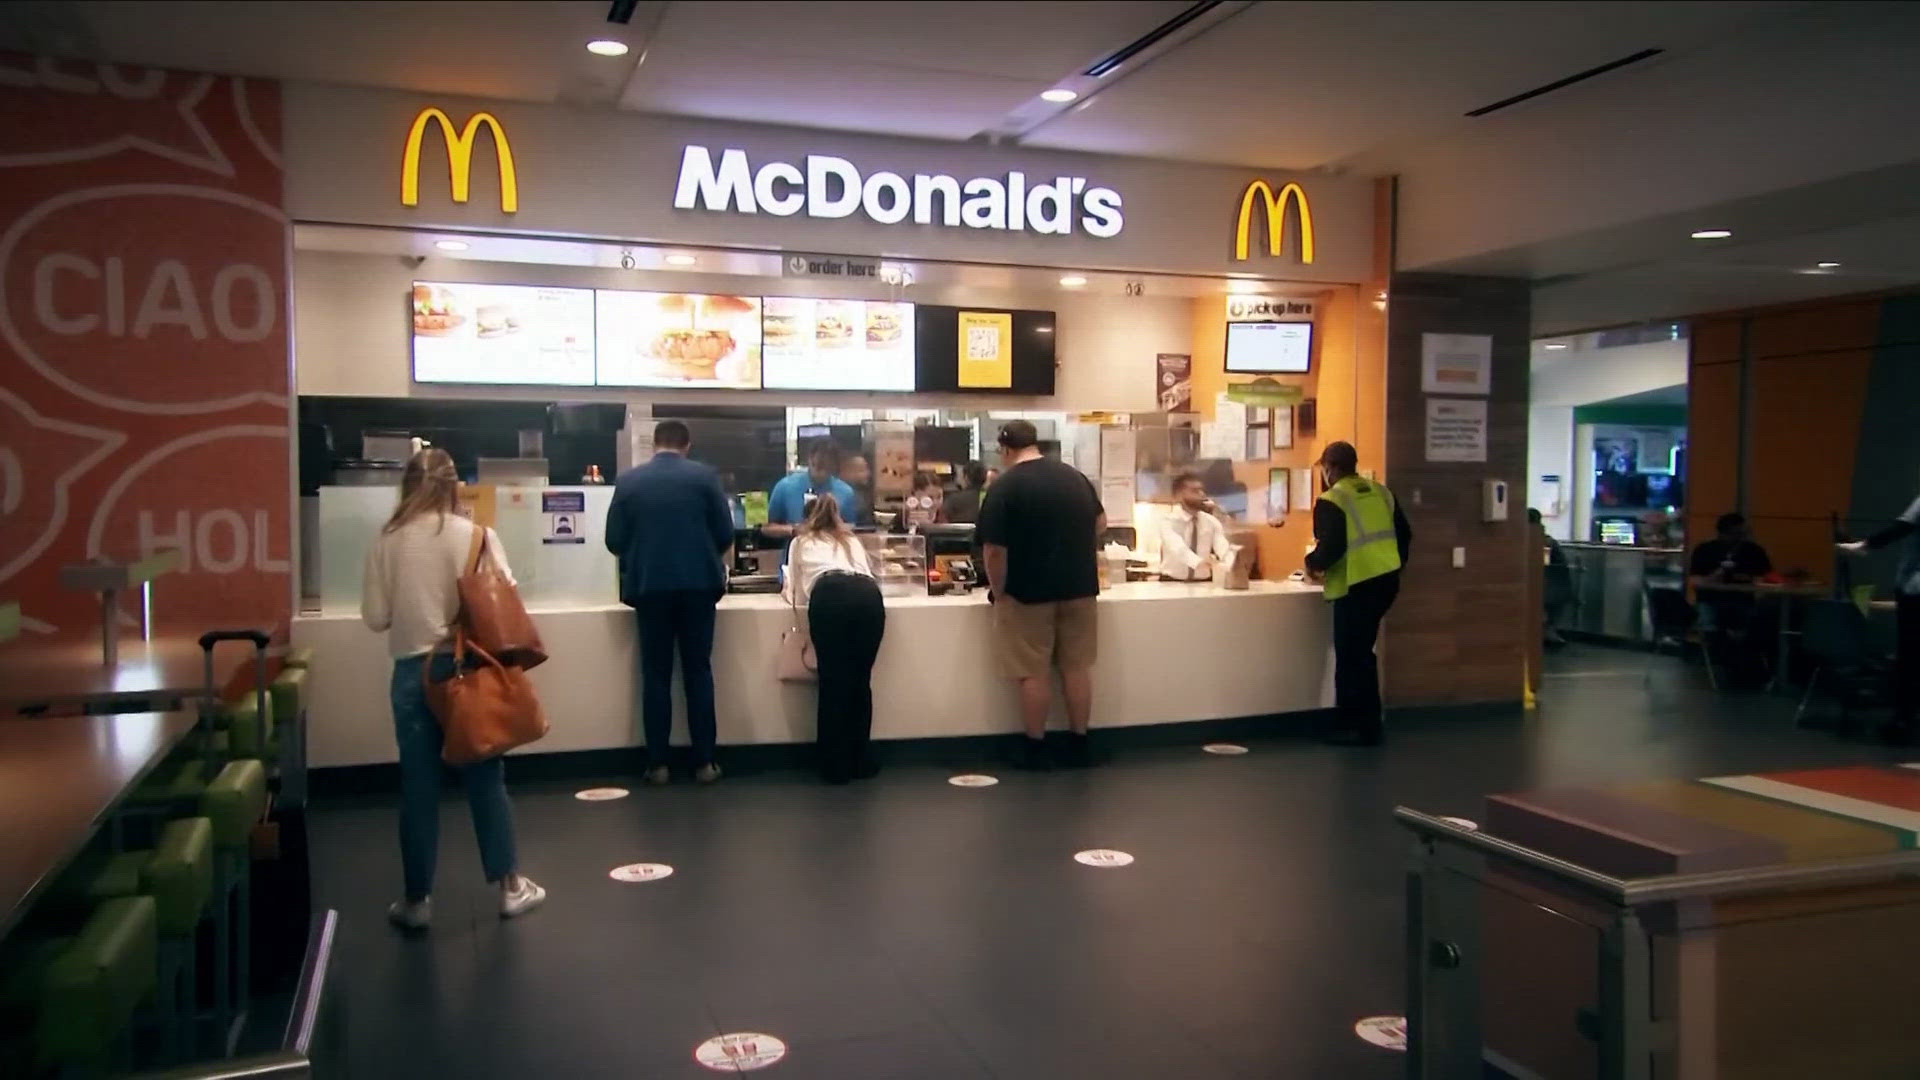 McDonald's $5 meals hoping to combat expensive fast food trend